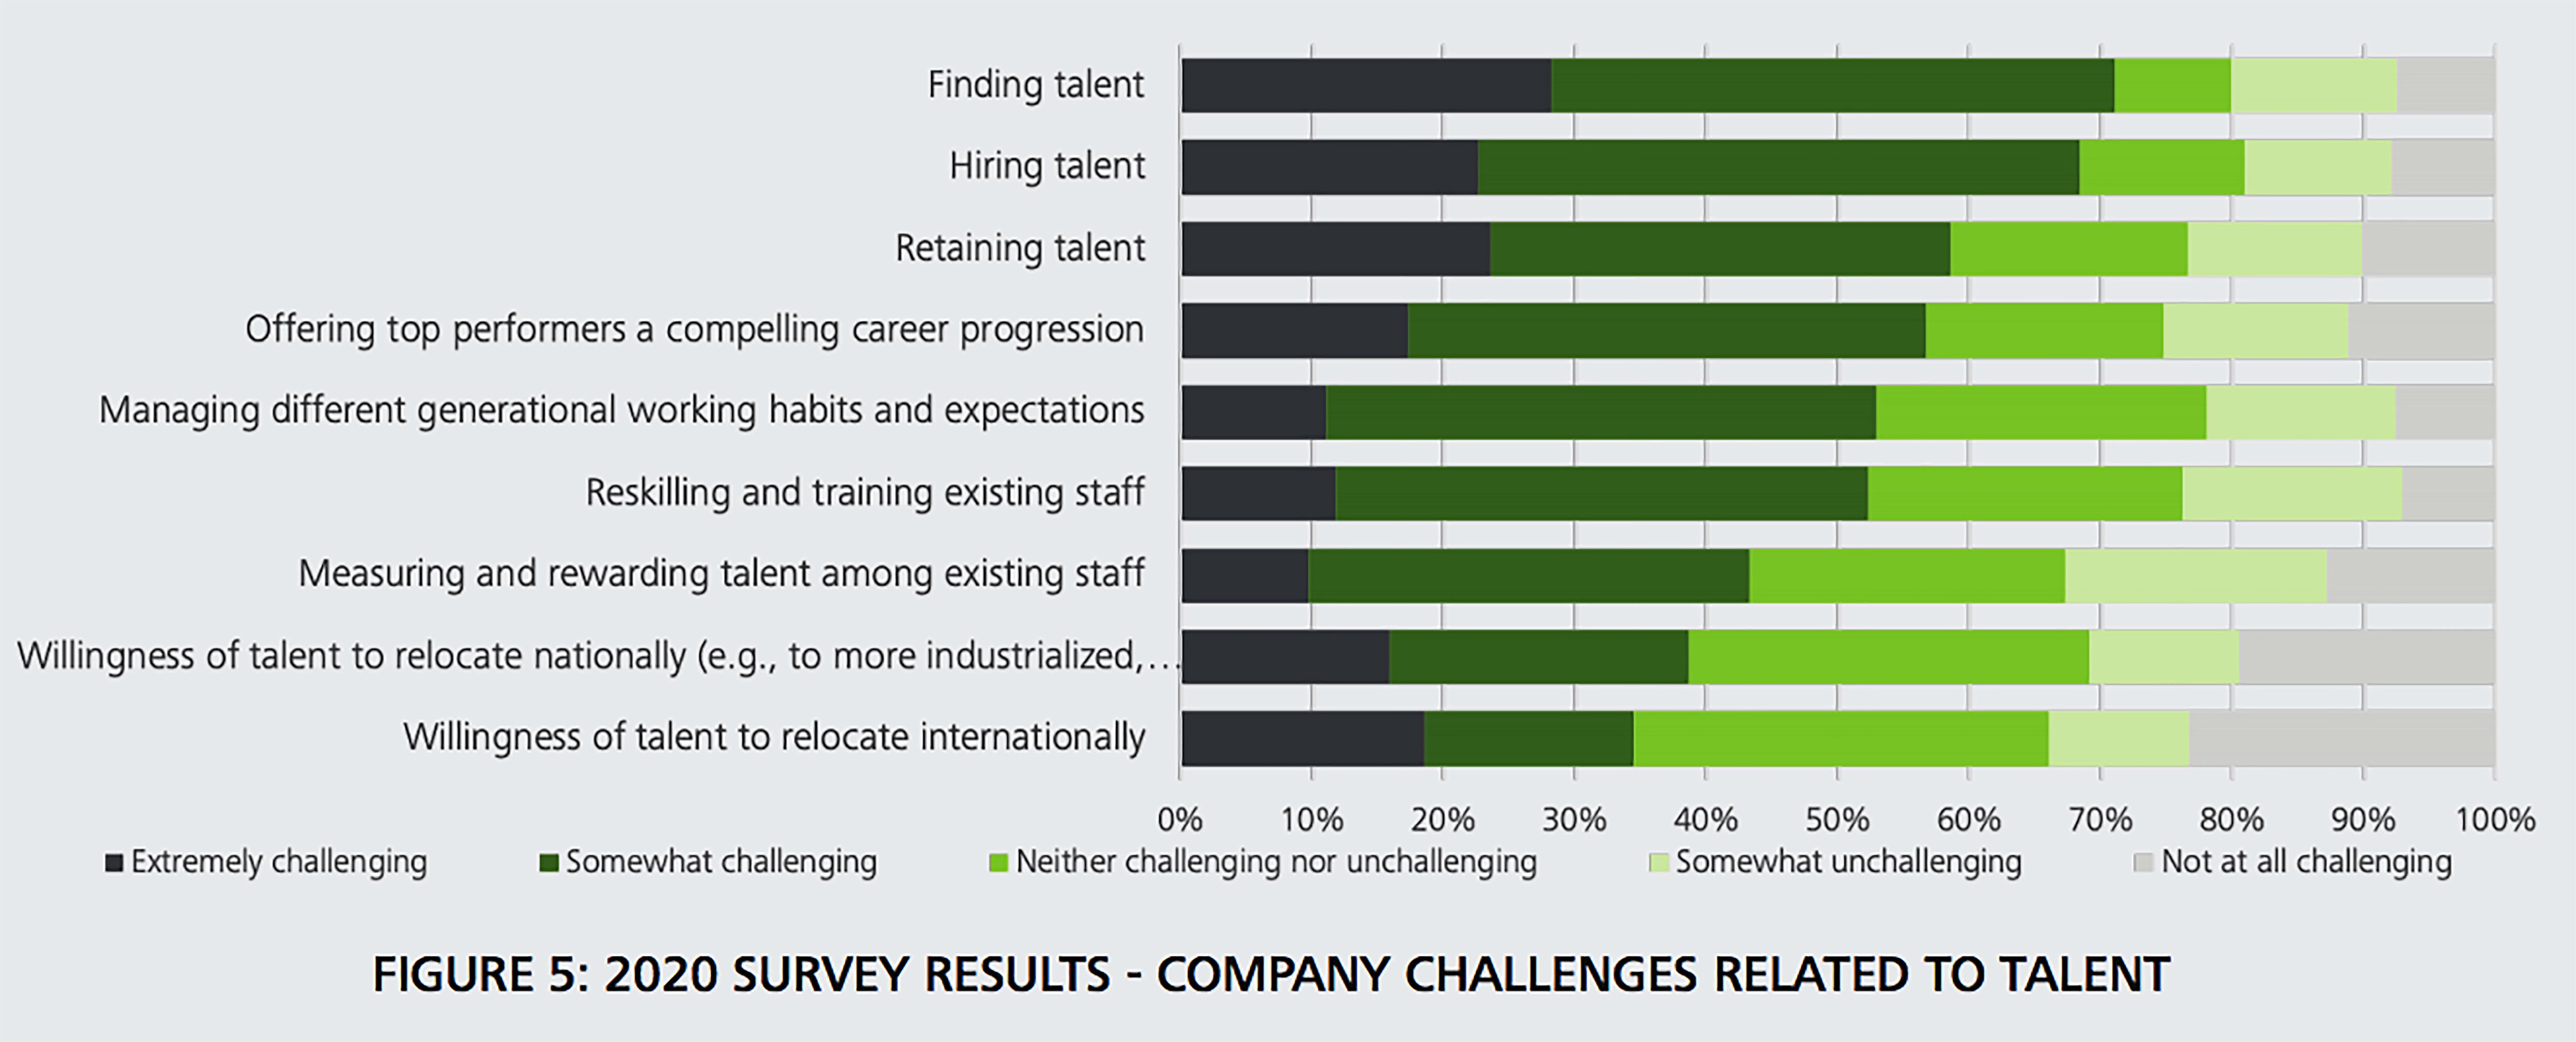 Chart 2: MHI’s 2020 Industry Report displays the top 9 company challenges related to talent, with finding, hiring and retaining talent being the most difficult.